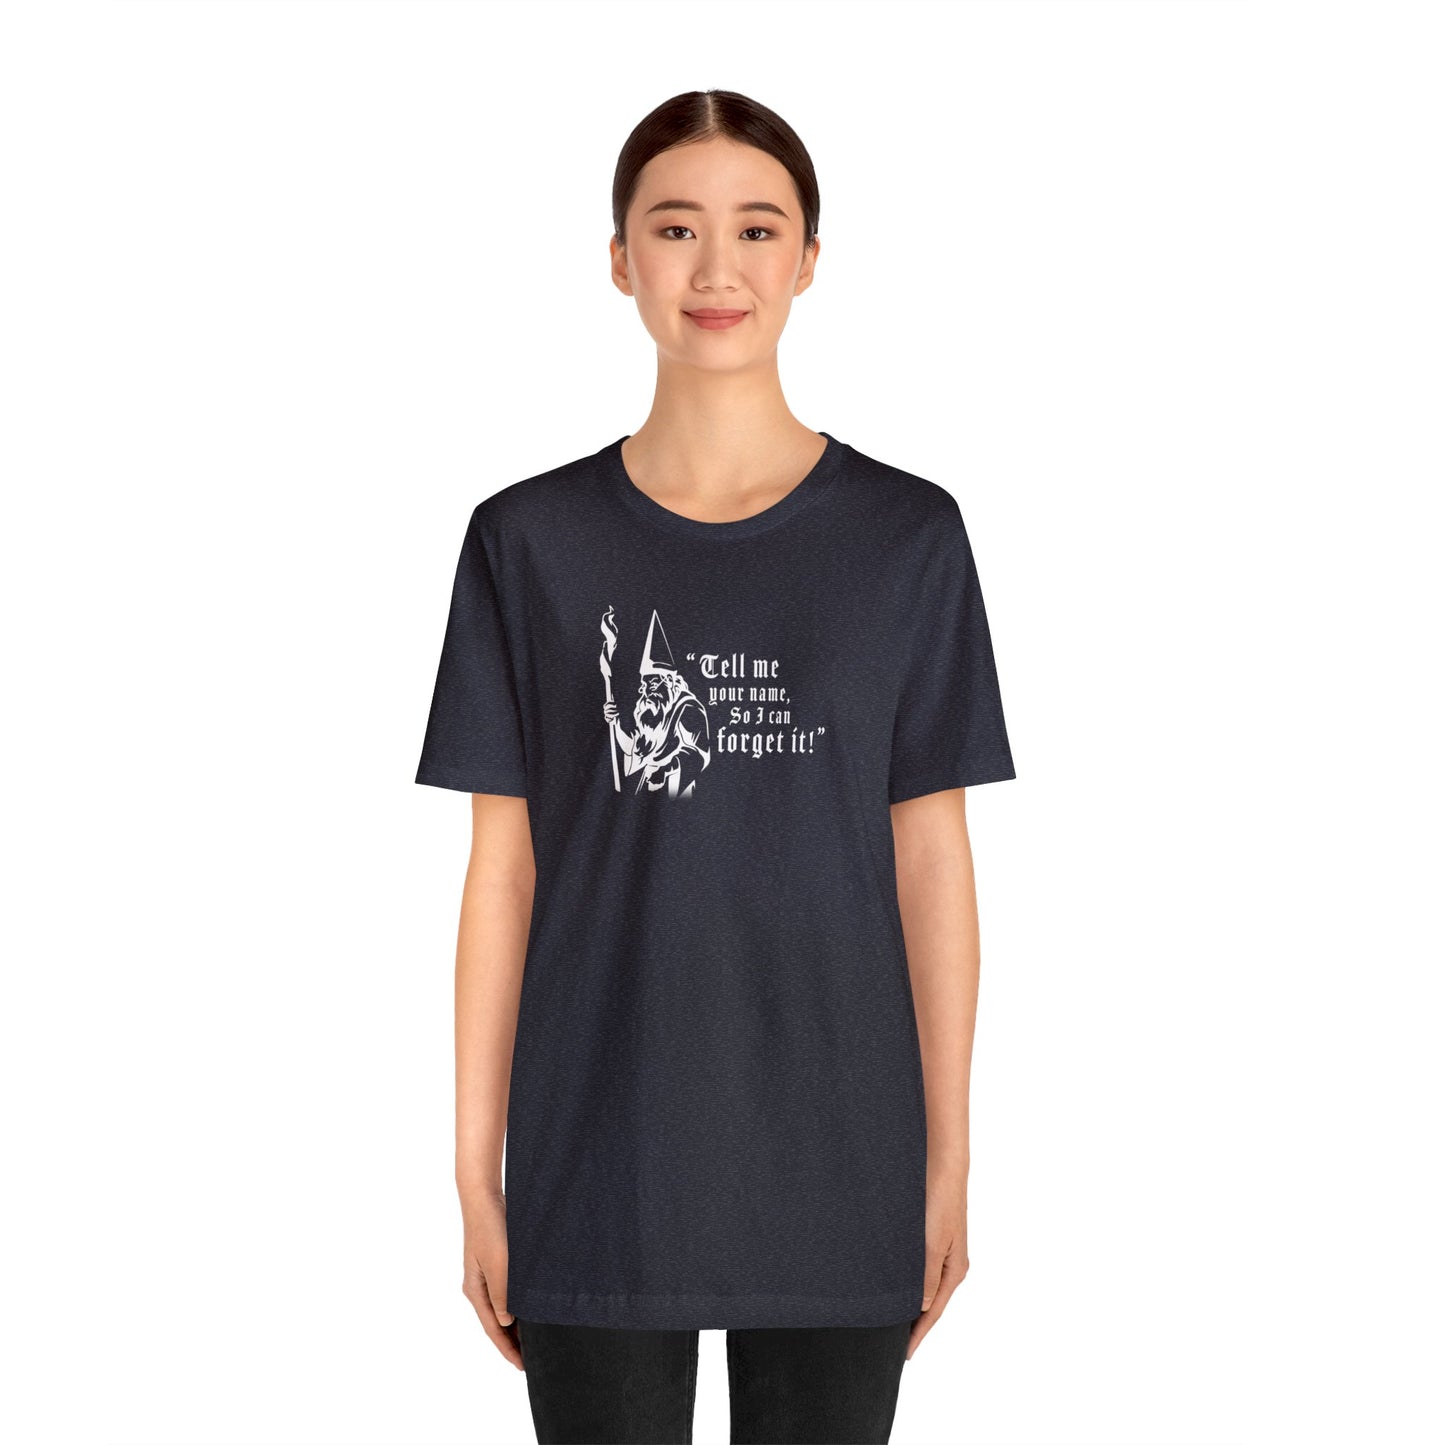 "Tell me your Name" (Oswald Version) - Call To Quest T-Shirt